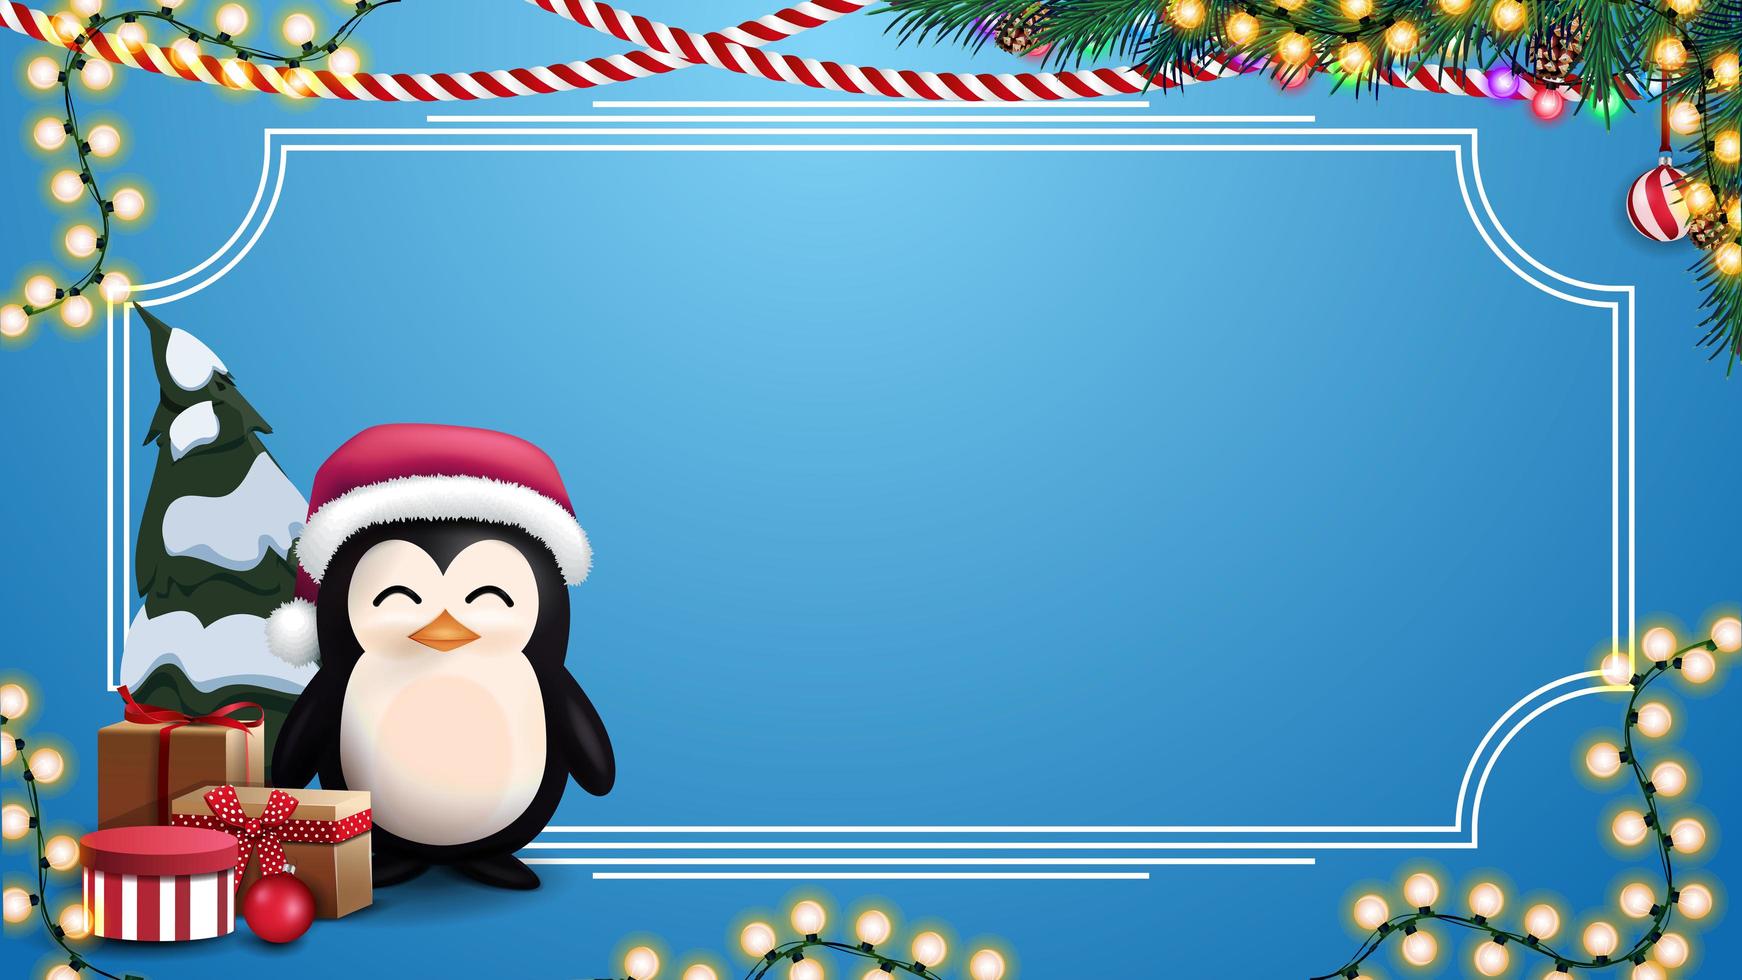 Christmas blue blank template for your arts with place for text, garlands, frame and penguin in Santa Claus hat with presents vector